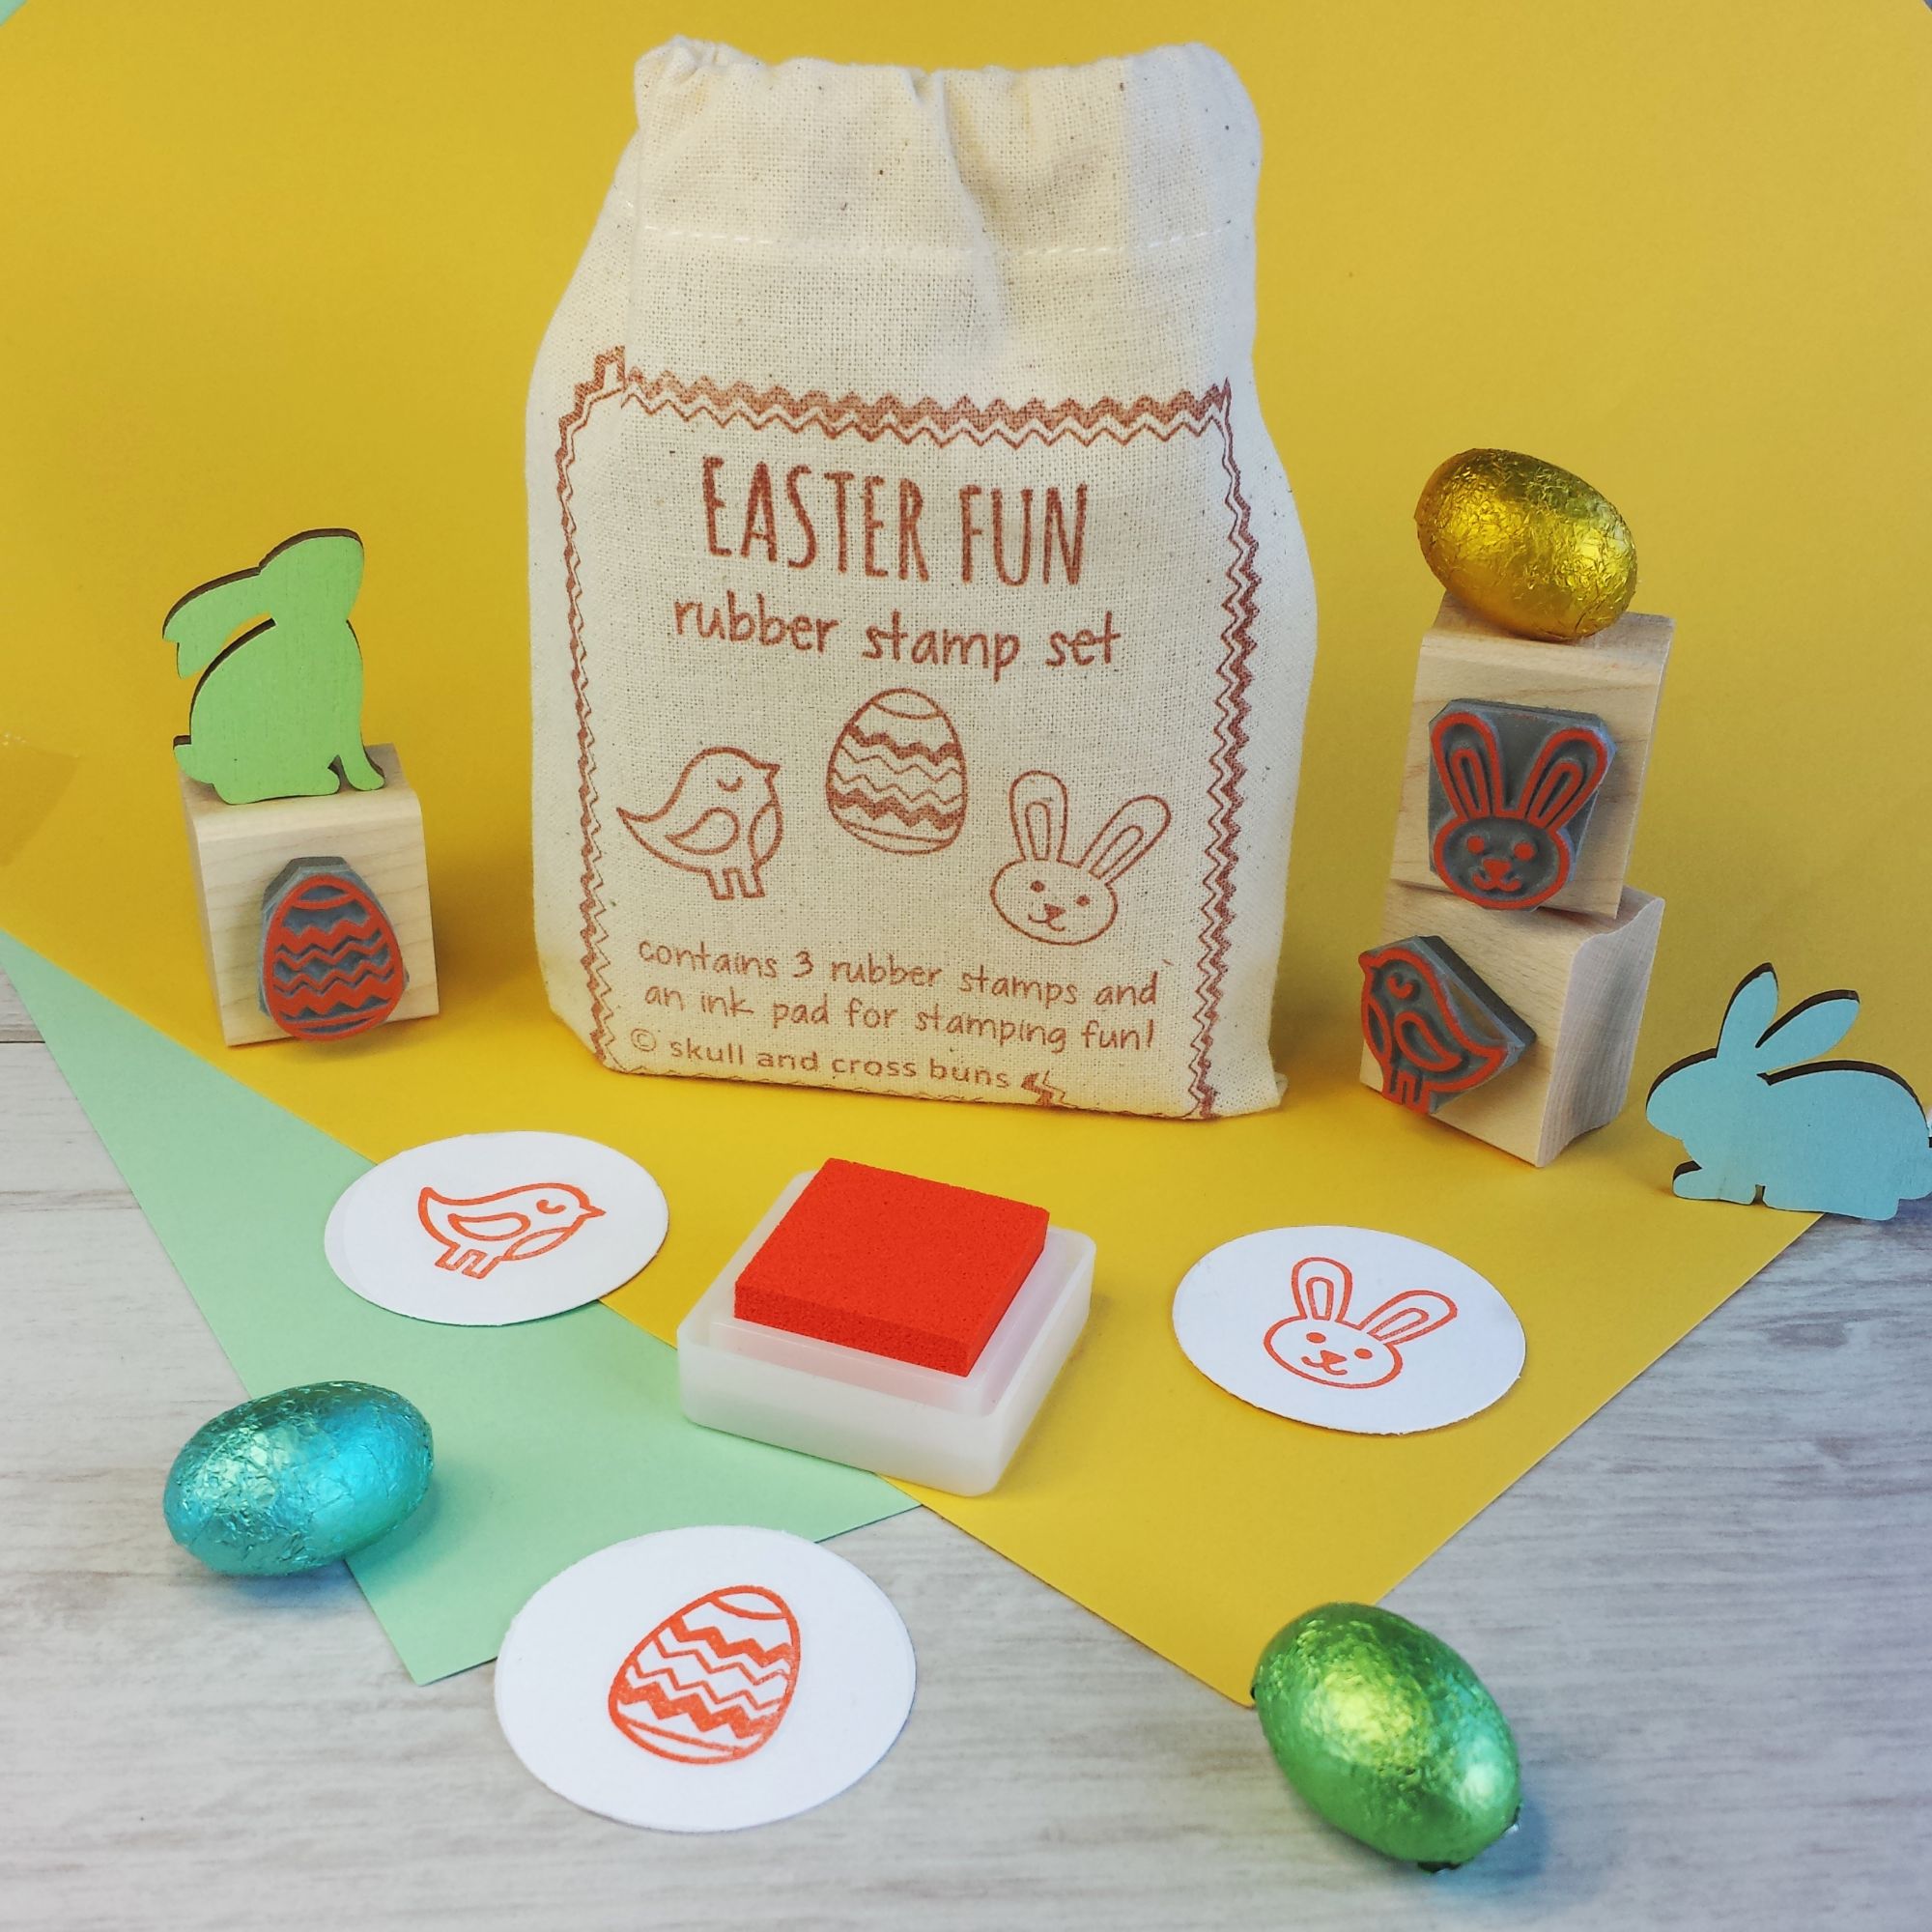 Easter Fun Rubber Stamp Set